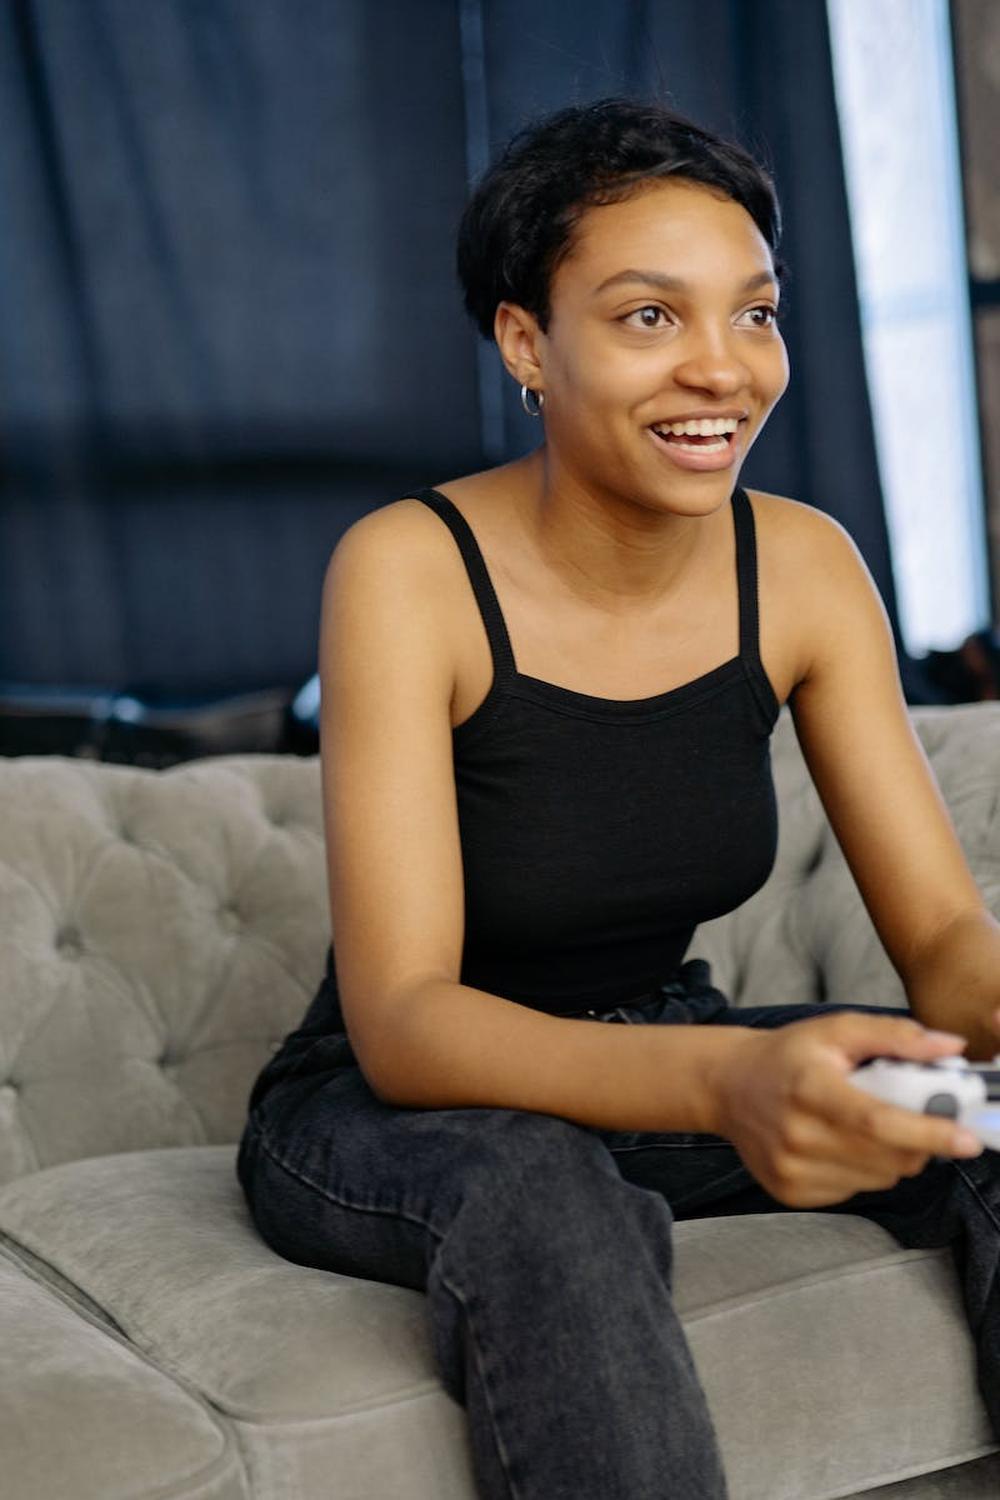 woman_smiles_while_playing_a_game_console